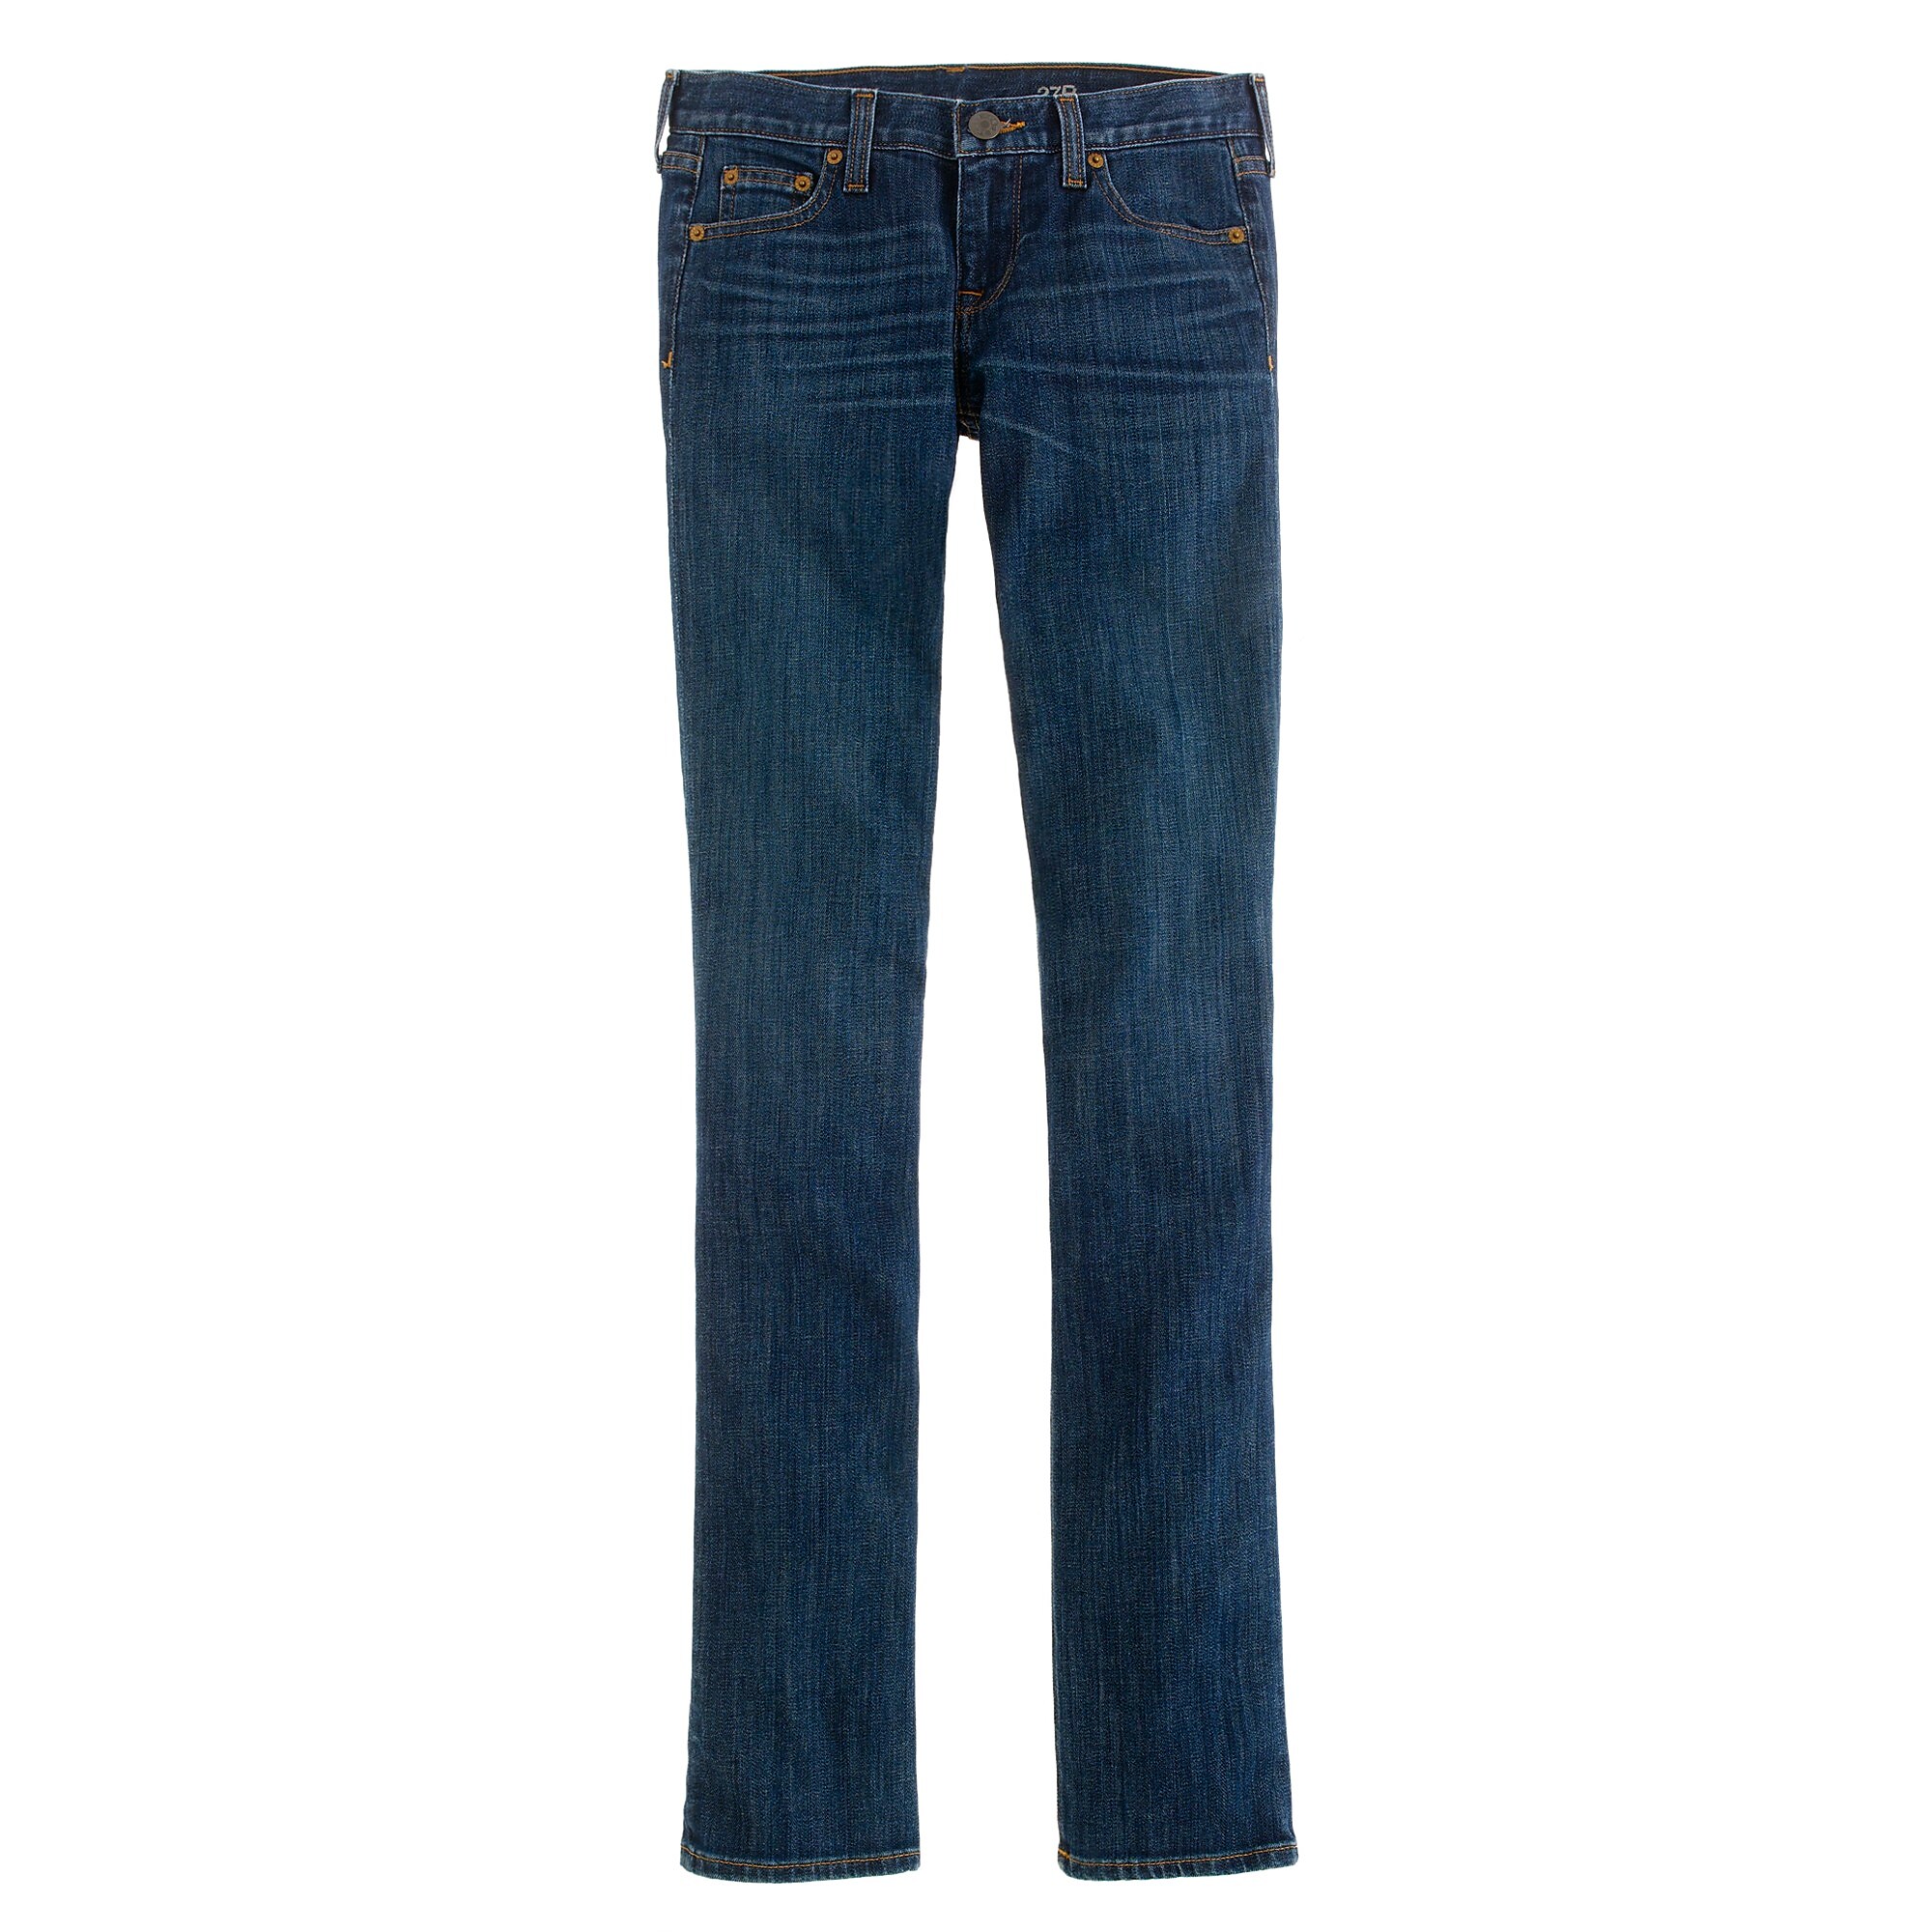 Matchstick jean in Old Glory wash : | J.Crew